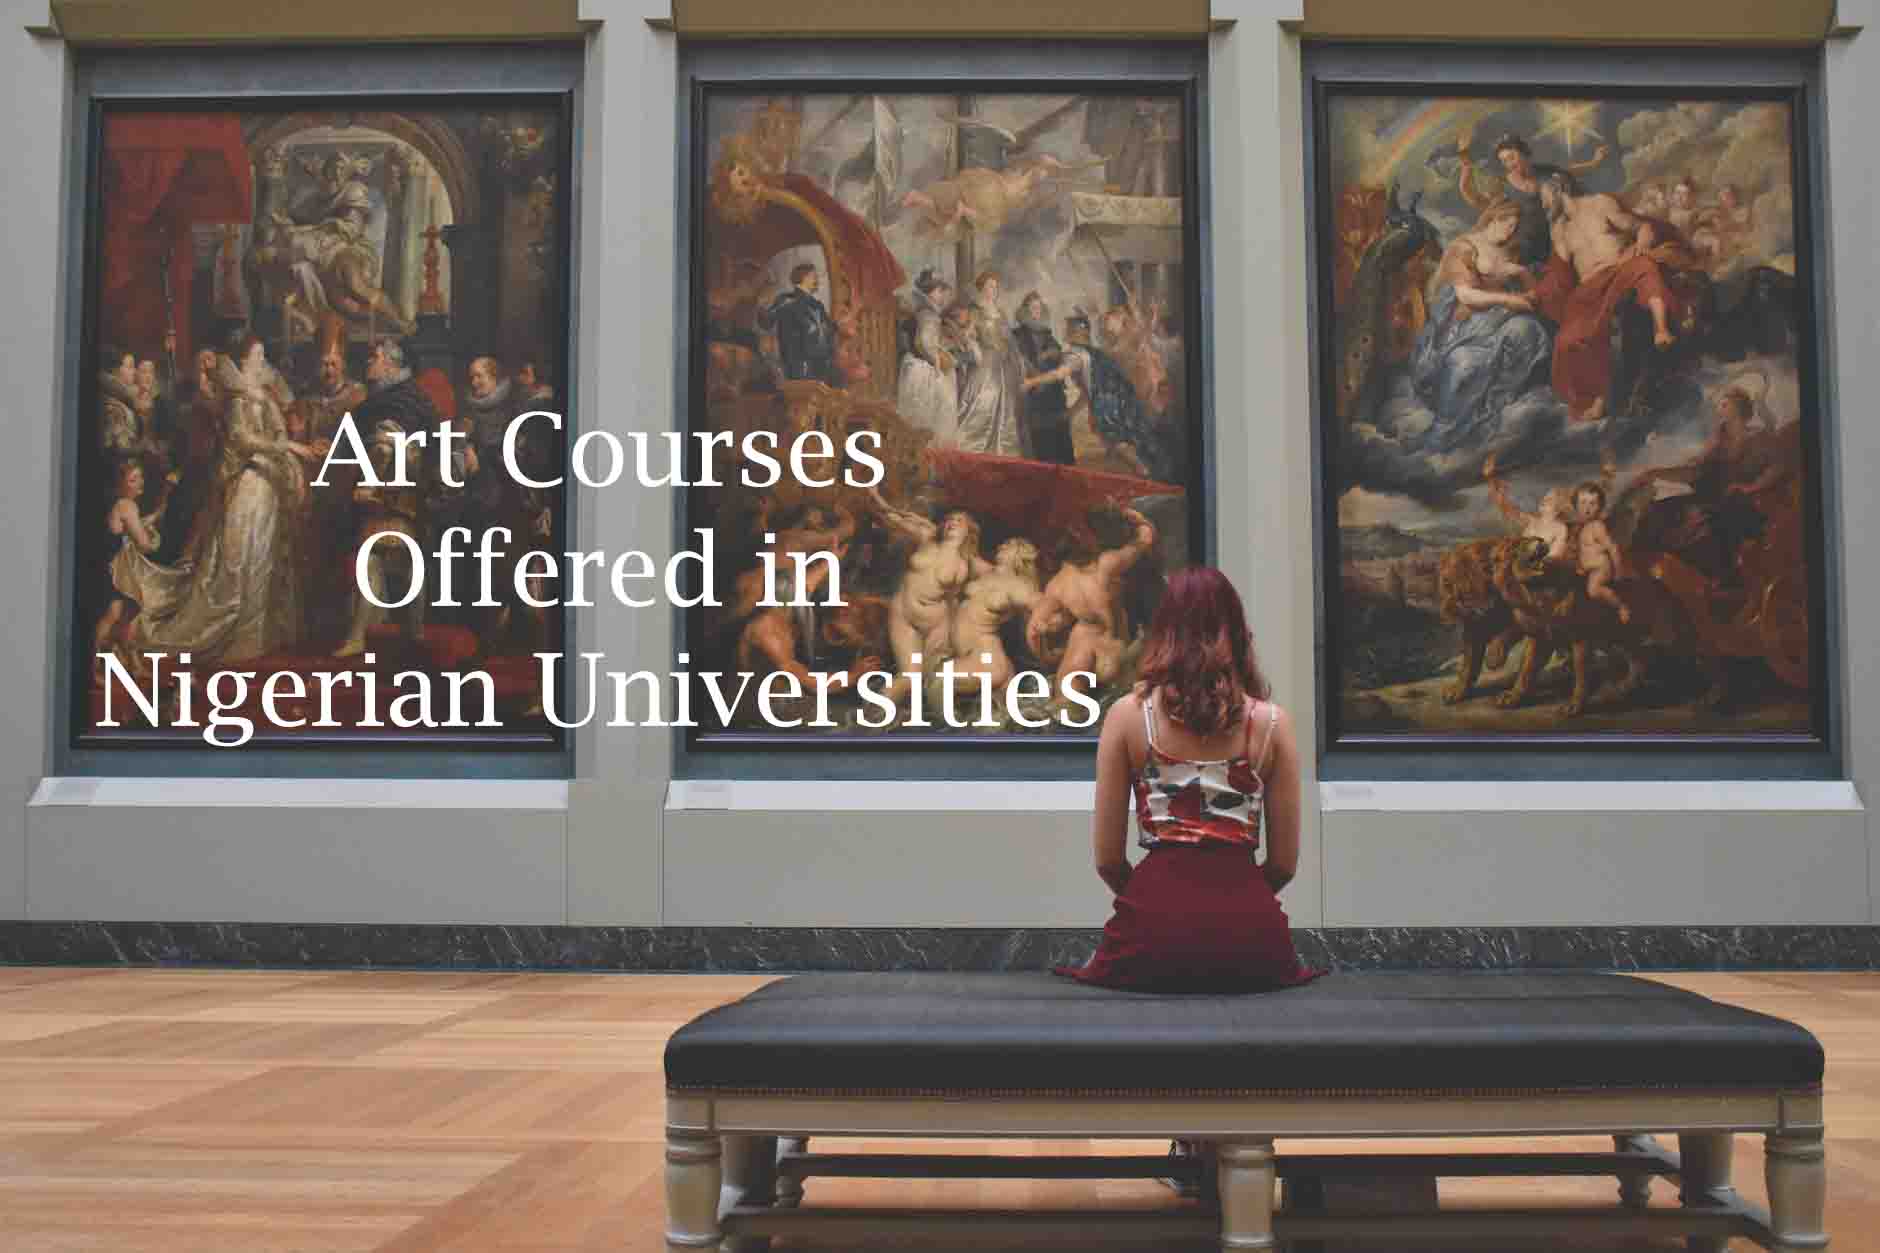 Art Courses Offered in Nigerian Universities